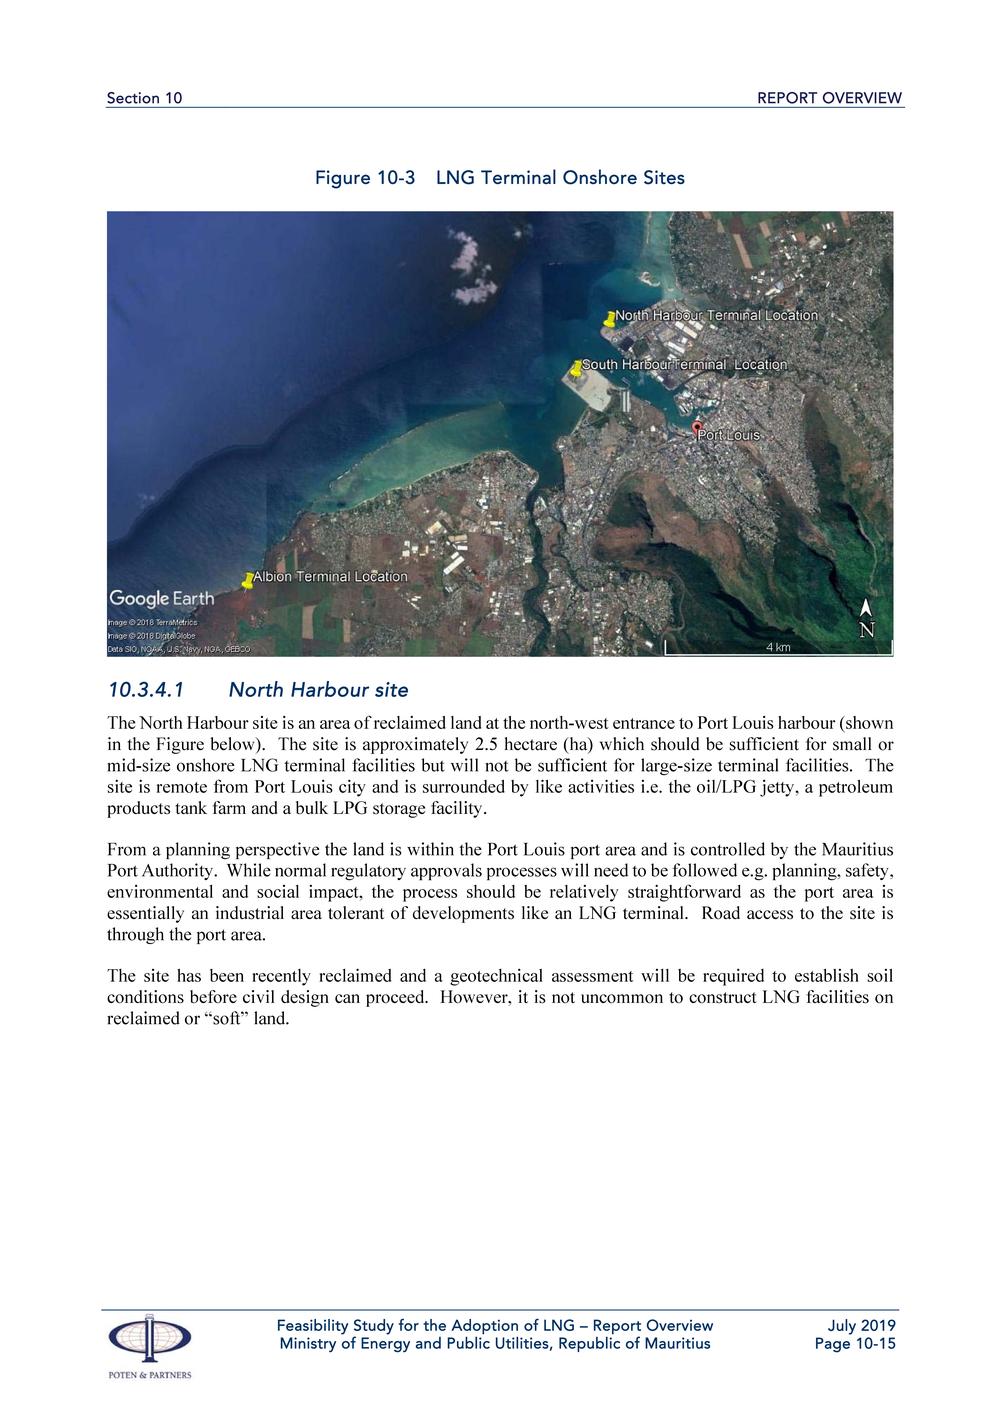 Report  Overview  Feasibility Study for the Adoption of Liquefied Natural Gas (LNG).